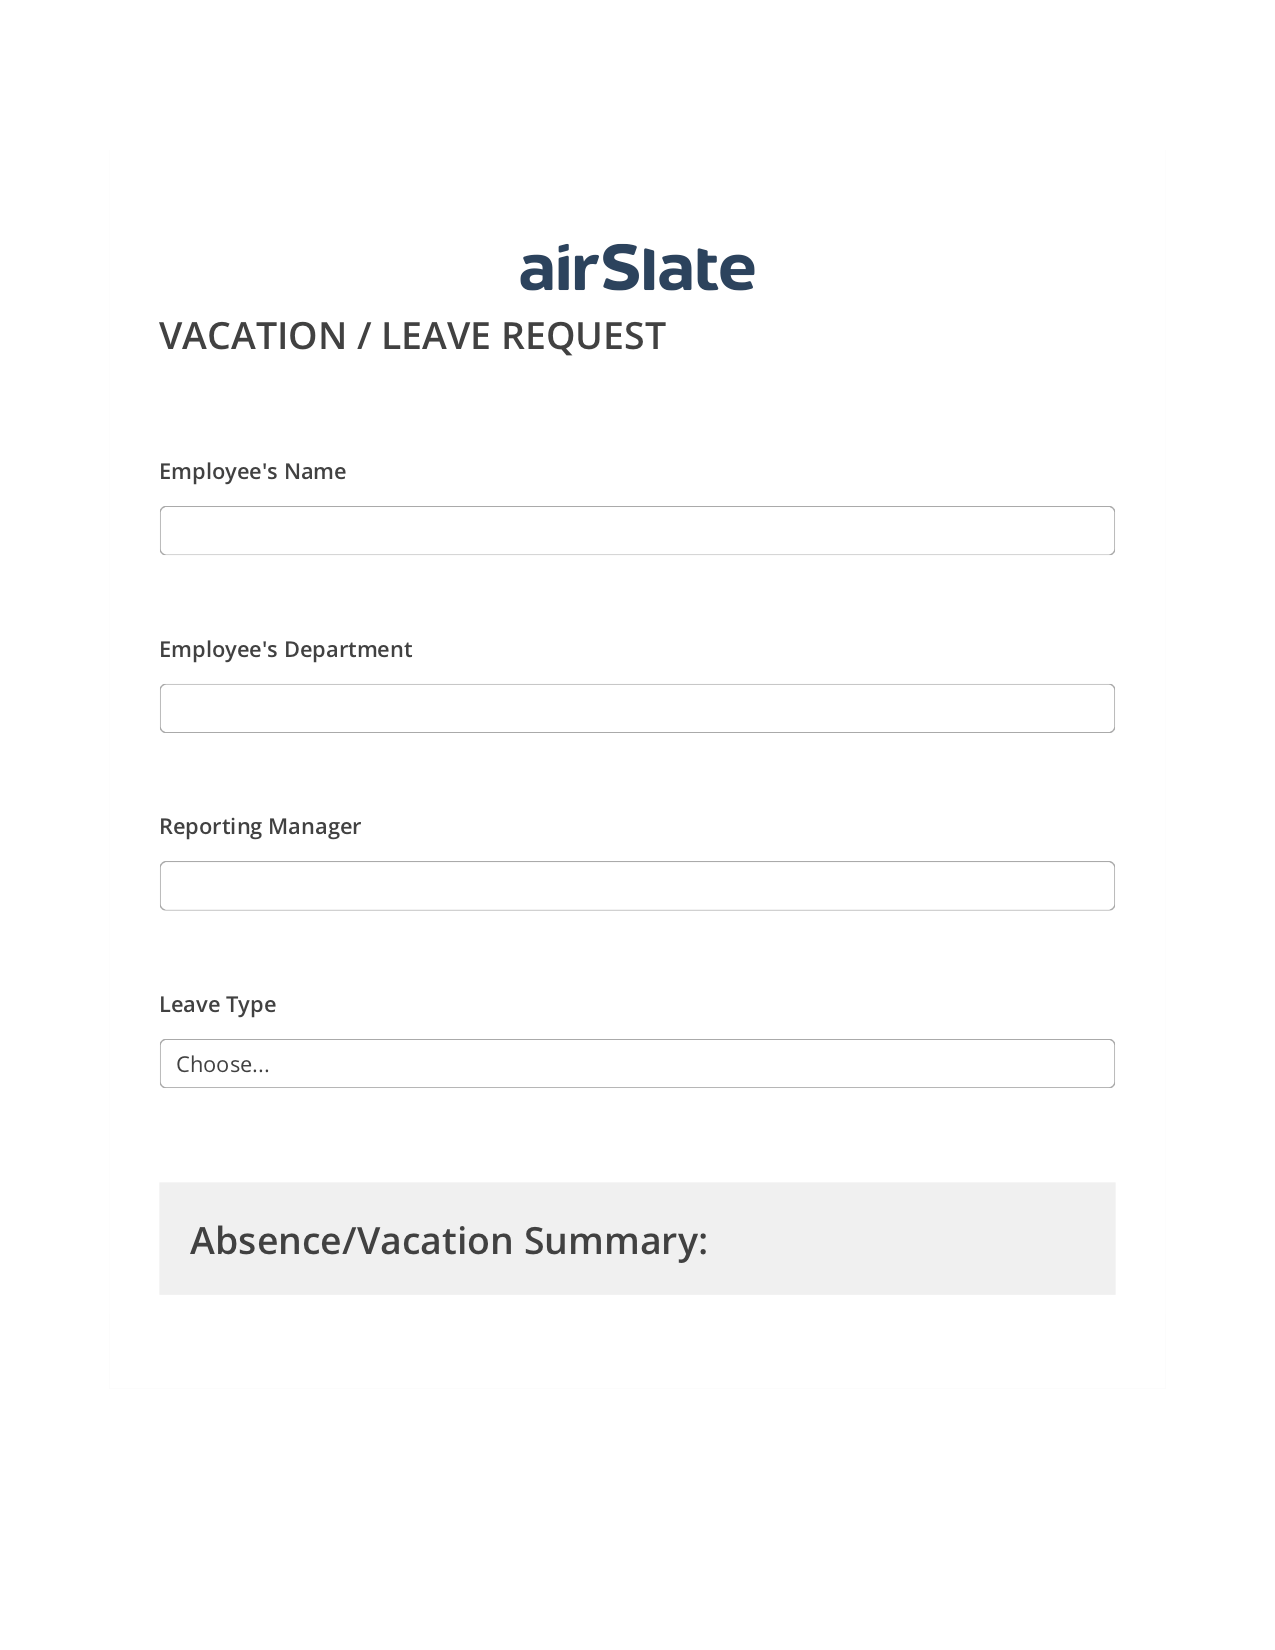 Multirole Vacation/Leave Request Workflow Pre-fill from another Slate Bot, Custom Field's Value Bot, Post-finish Document Bot